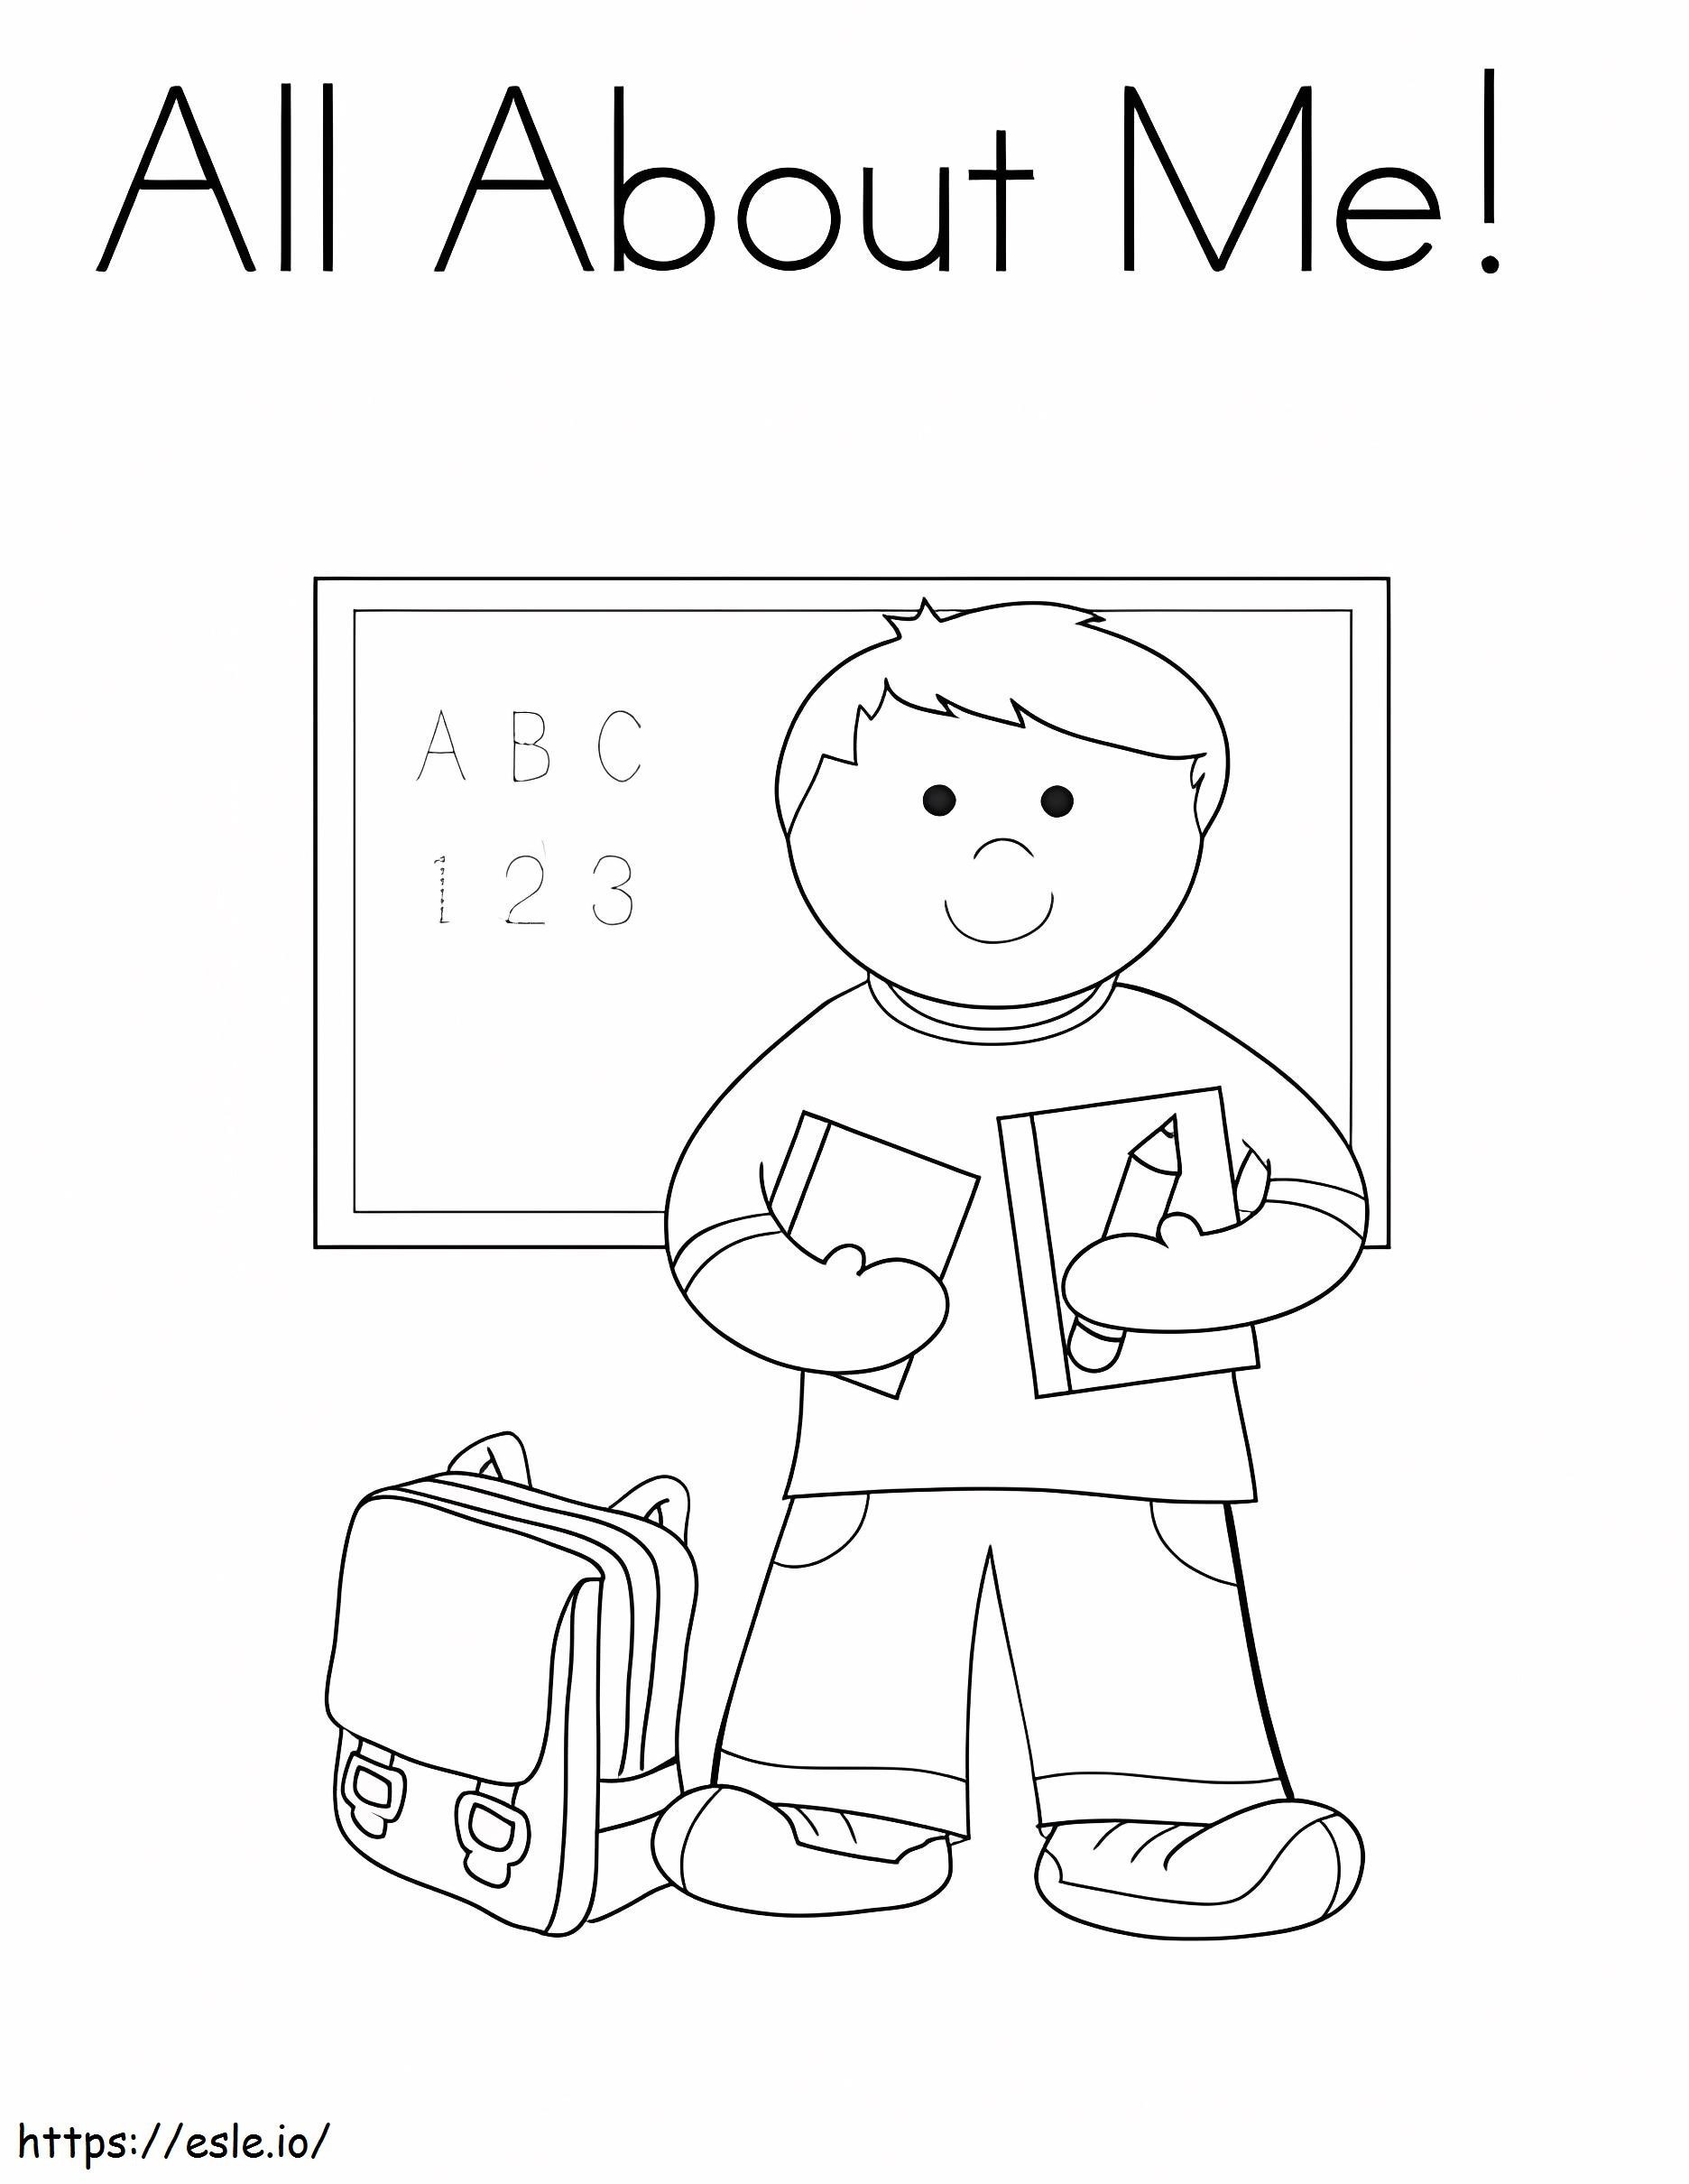 Free All About Me coloring page